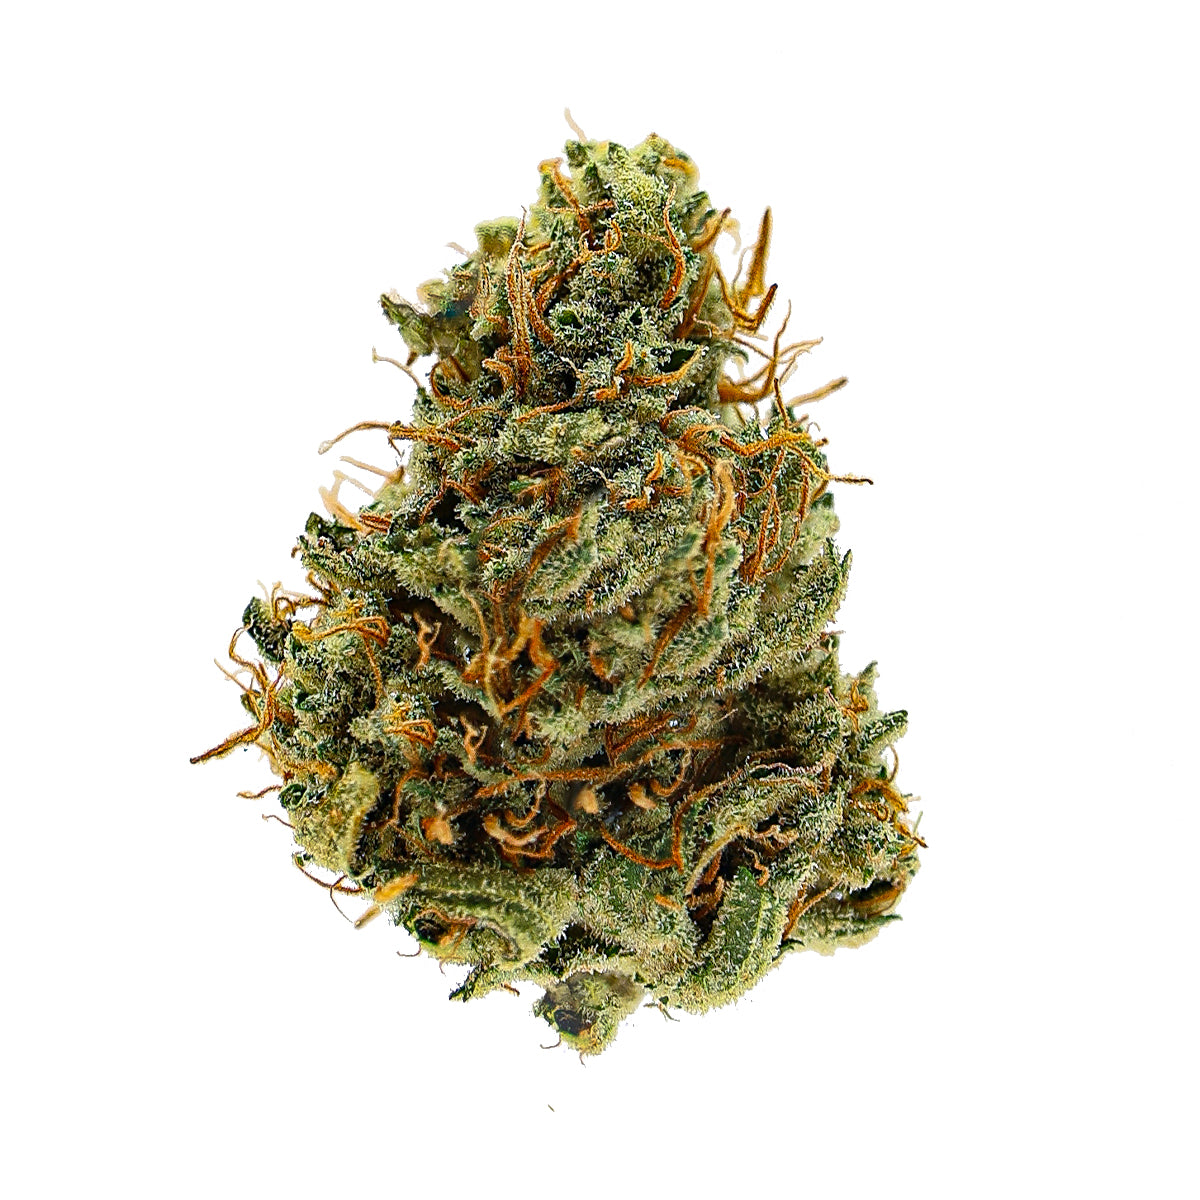 Shivas Dance Premium CBD Indica Hemp Flower - This is an indica dominant CBD strain with large, bright green buds caked in trichomes. Hints of lemon and gas come together to make this beautiful flower incredibly tasty. Grown by a local Tennessee farmer. Available in 3.5g and 14g size jars.